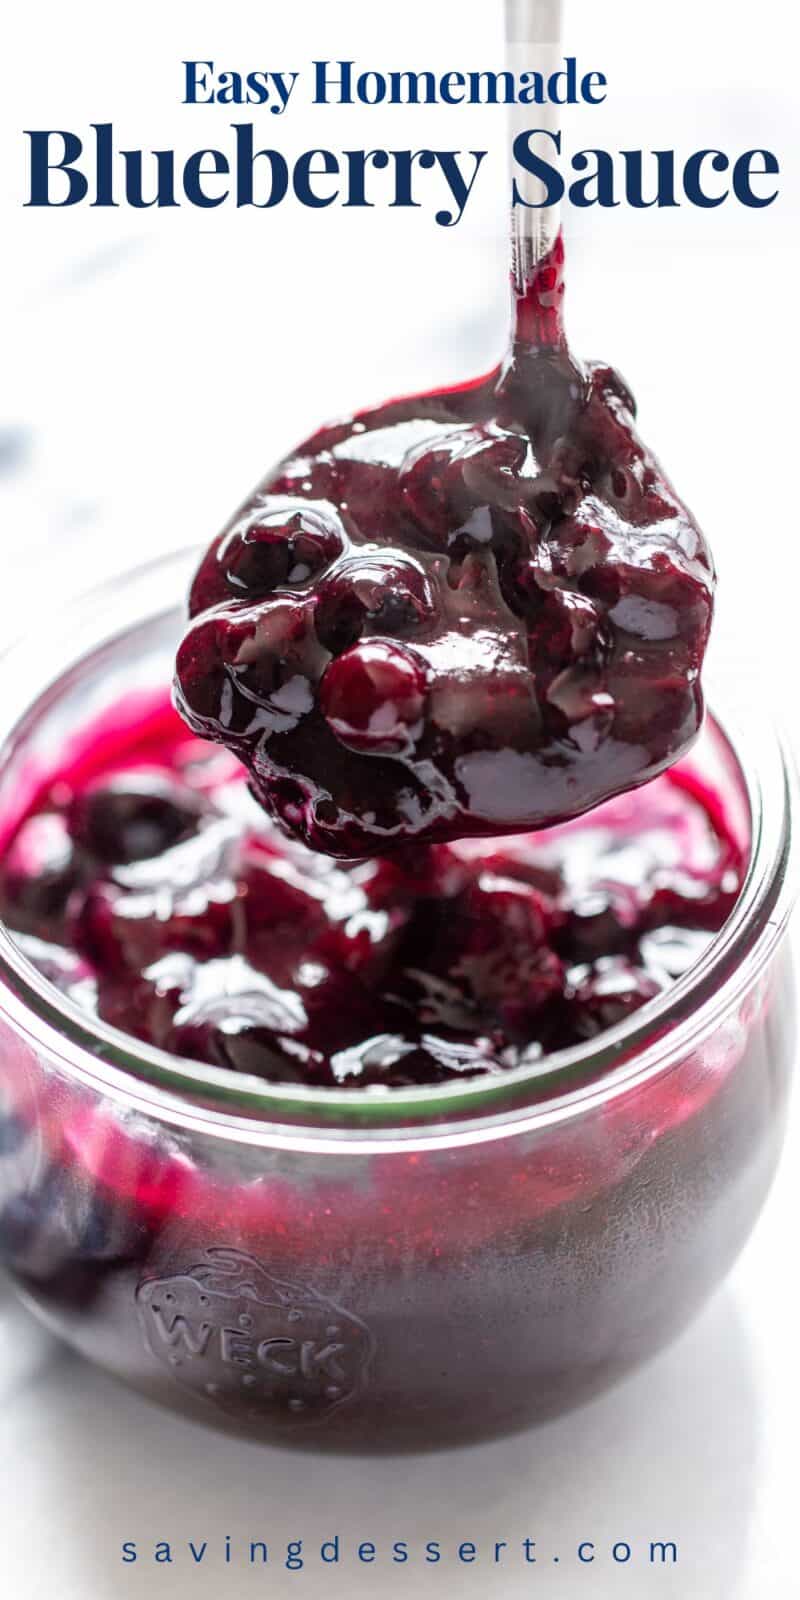 A ladle filled with blueberry sauce being scooped out of a jar